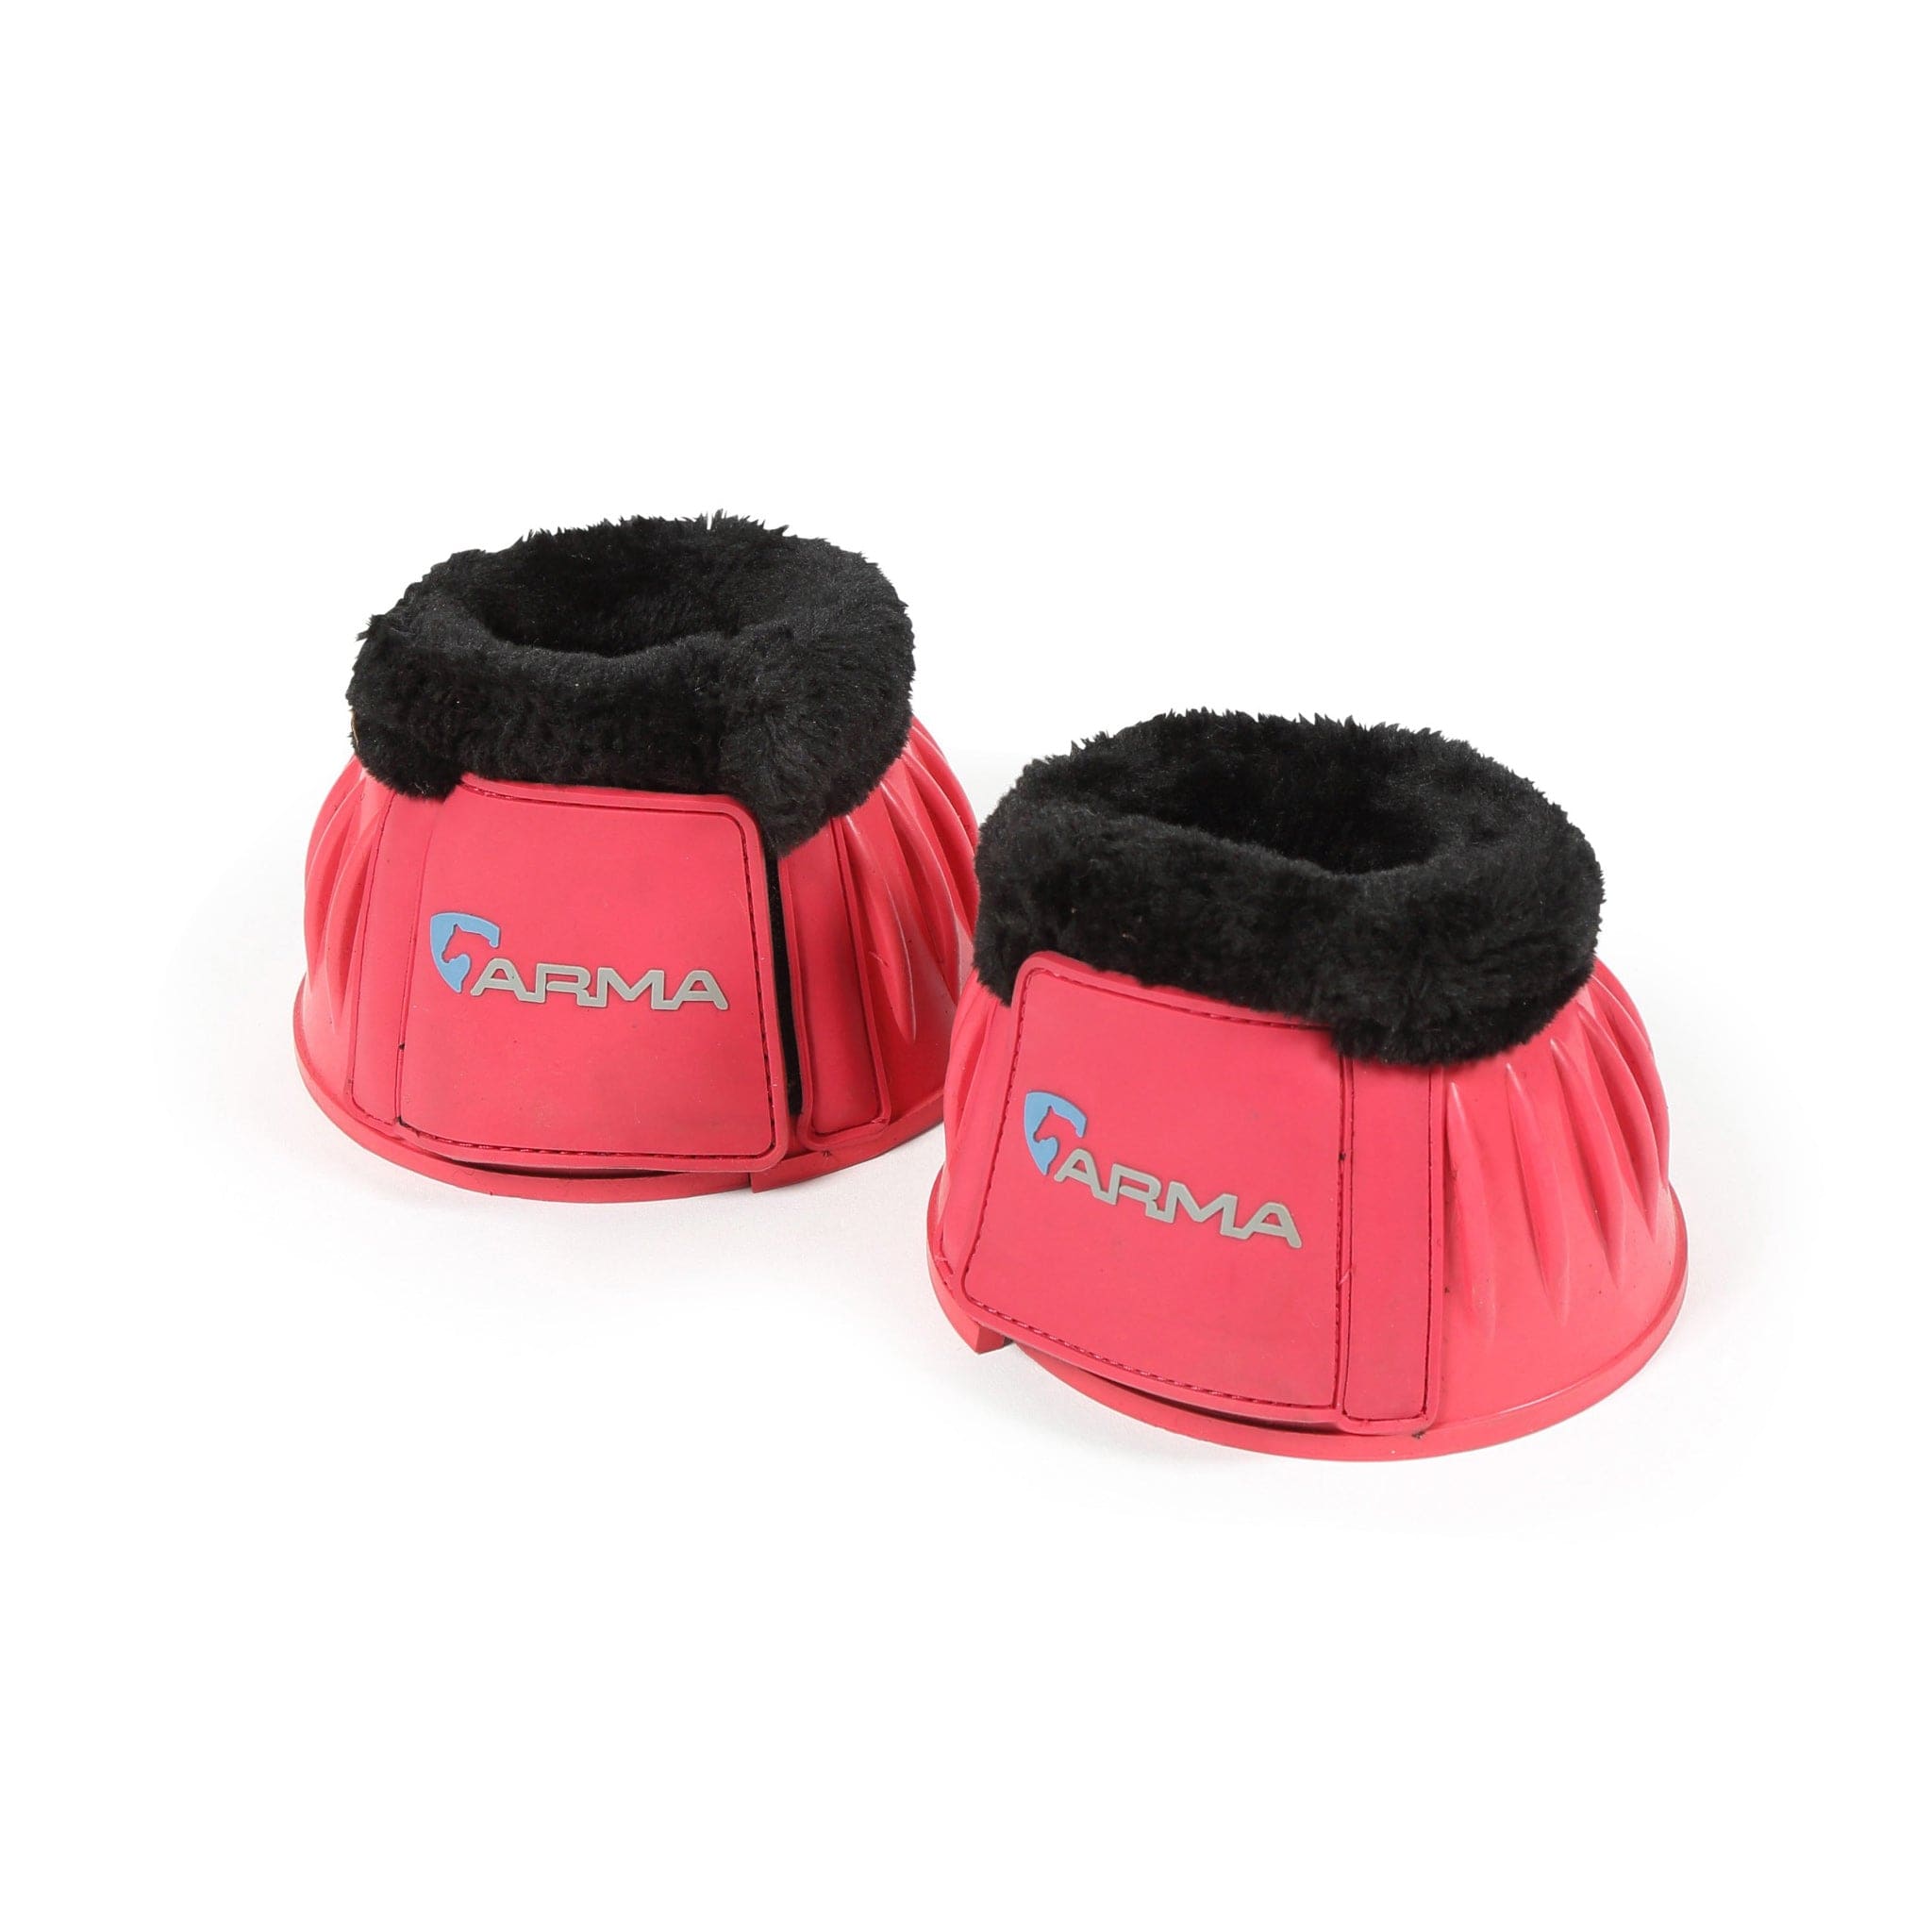 ARMA Fleece Topped Over Reach Boots Pink 134F